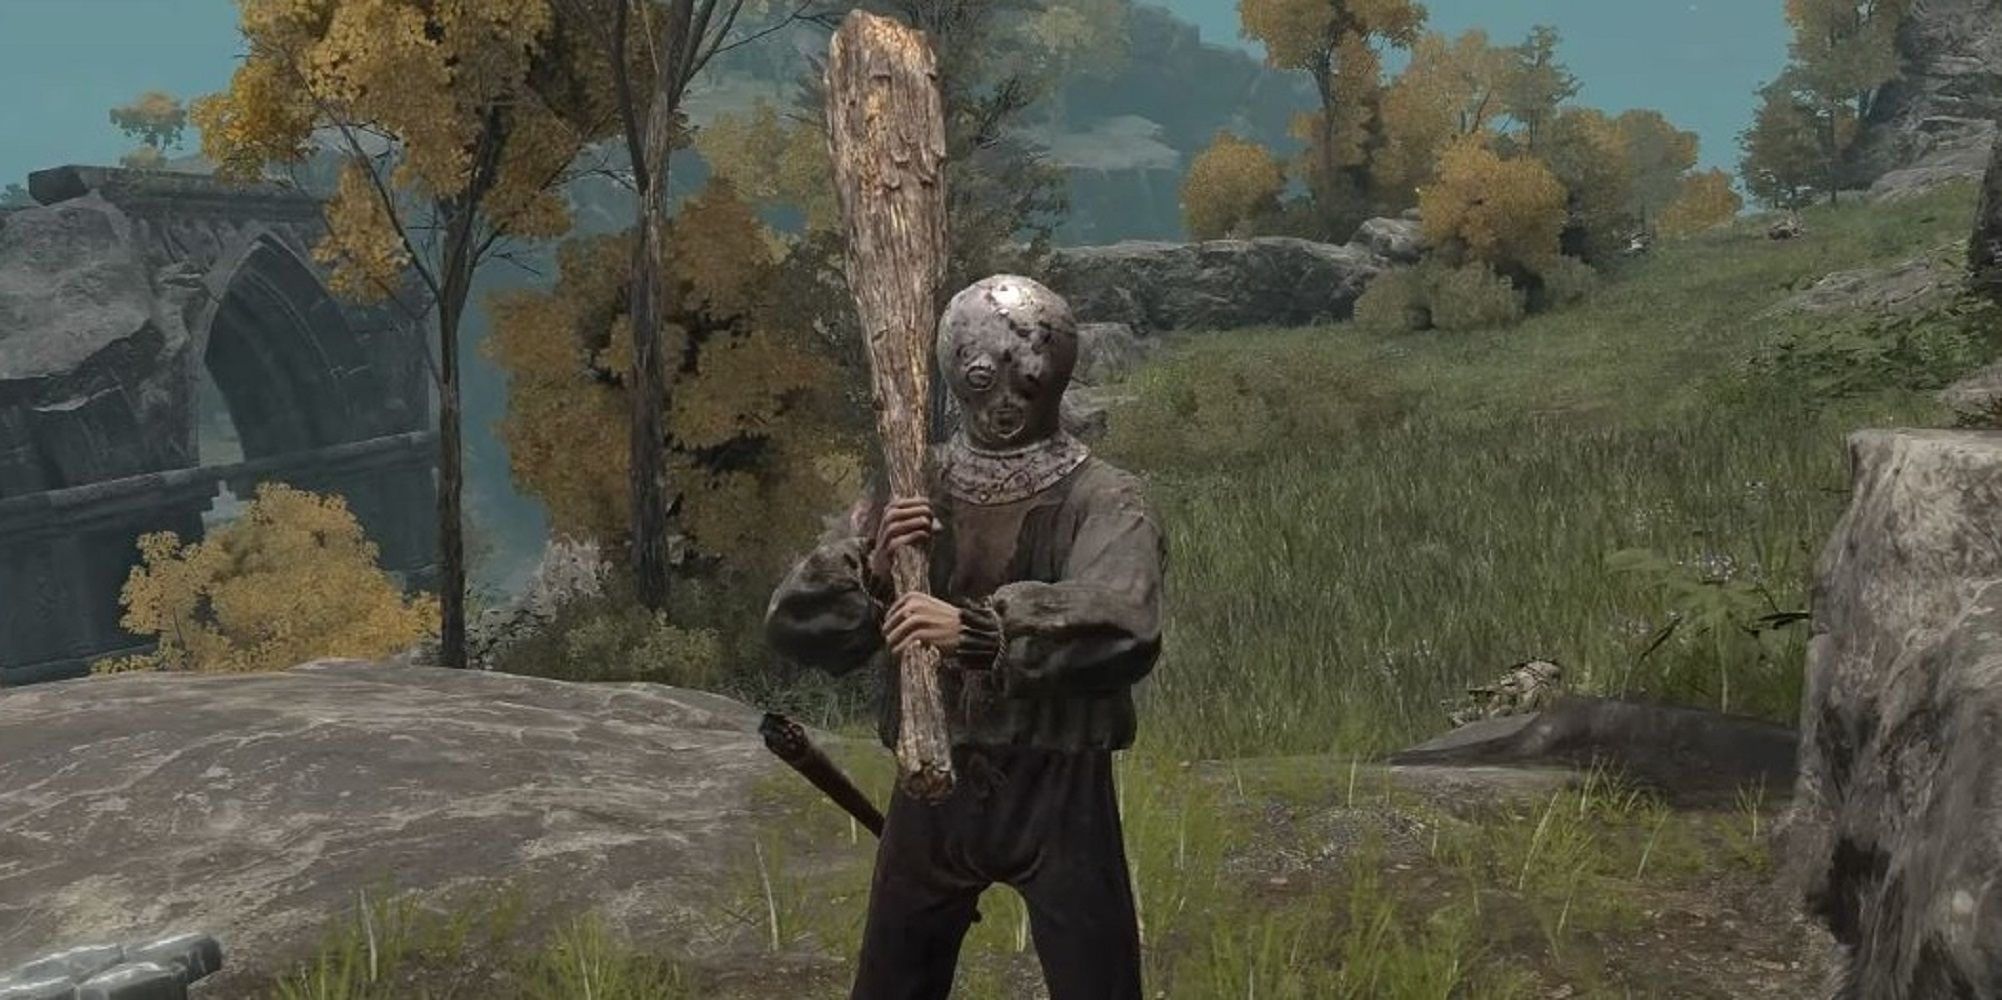 Elden Ring character holding the Large Club weapon